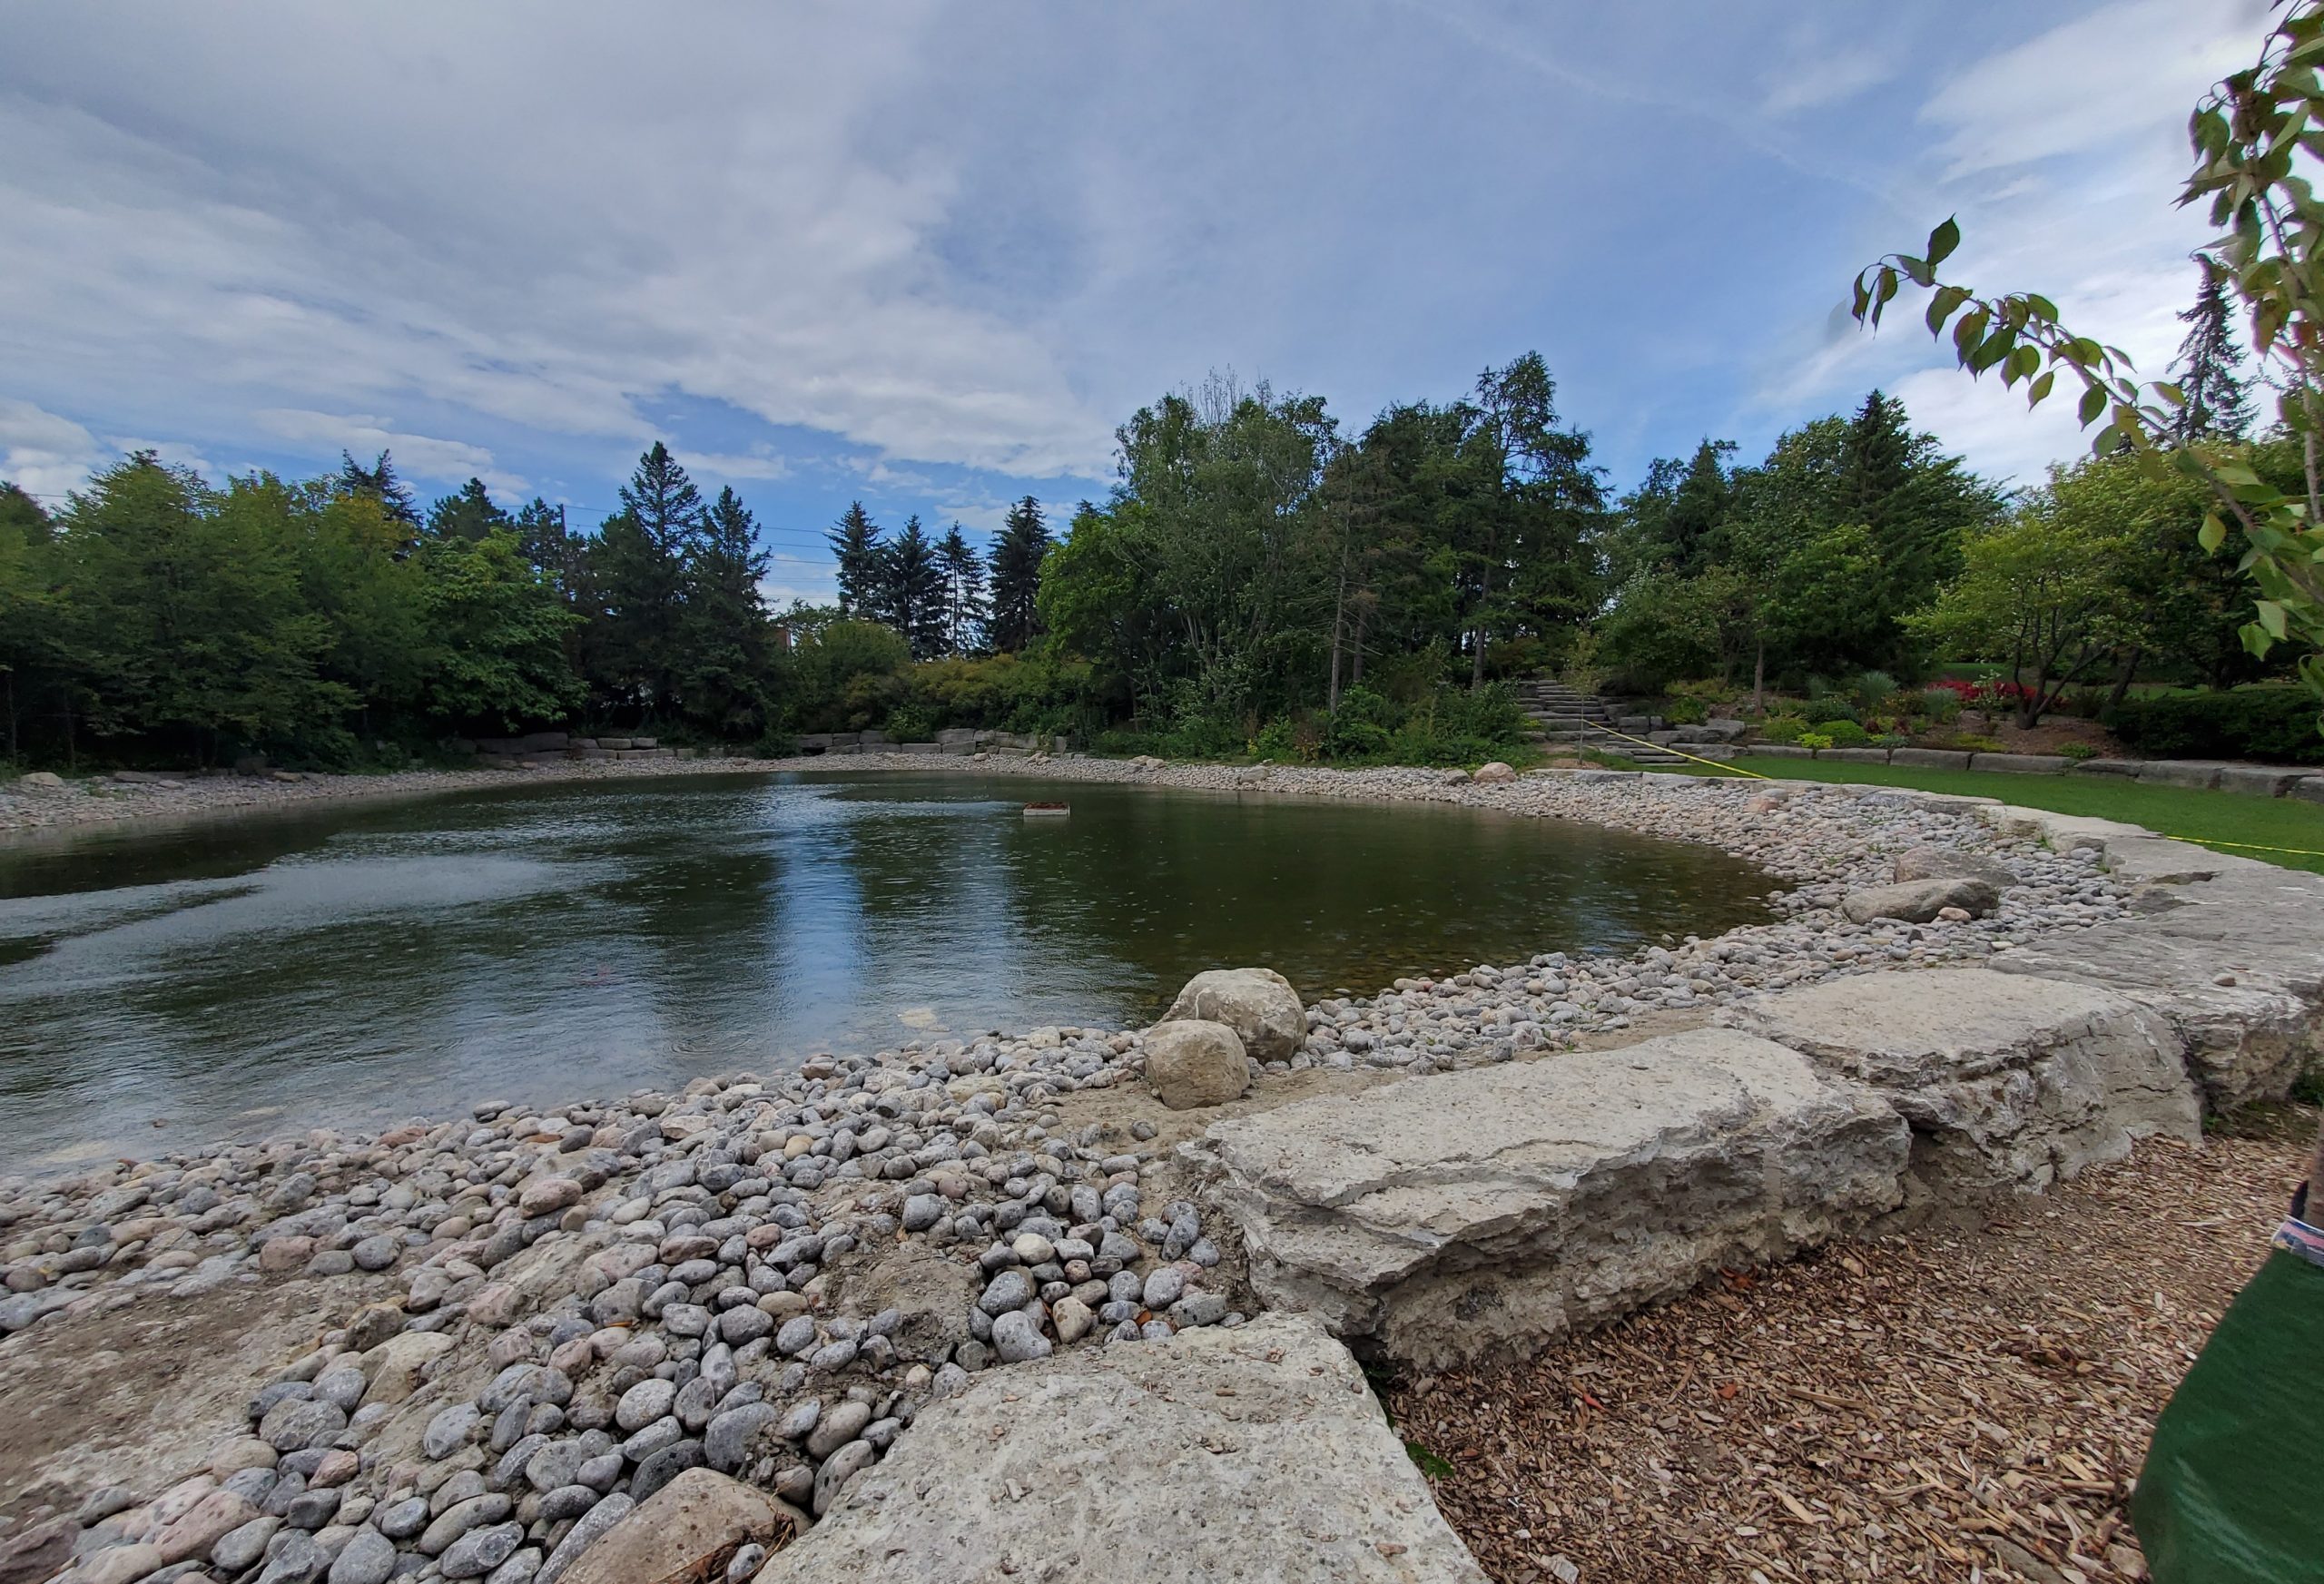 A photograph of the restored Pond A and stream, which occurred during Phase 2 construction. The photo is taken facing north towards Steeles Avenue East and shows a pond surrounded by mature trees and rocks.